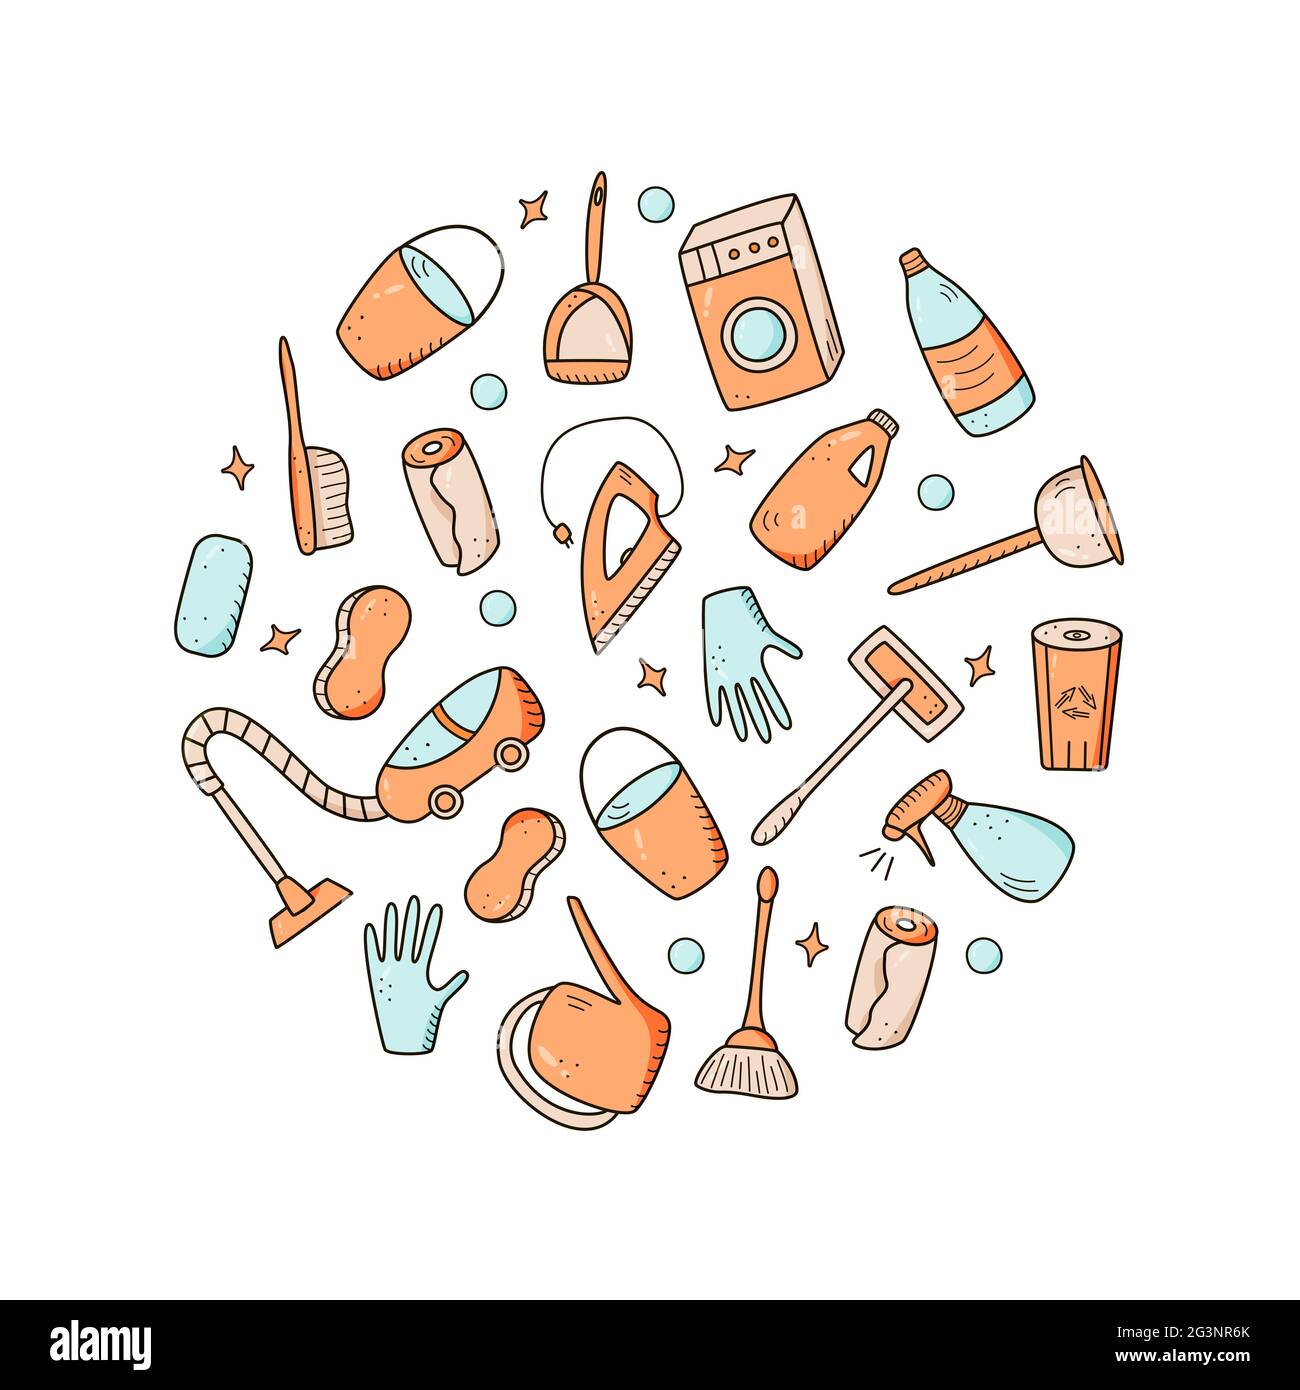 https://c8.alamy.com/comp/2G3NR6K/doodle-style-vector-cleaning-elements-a-set-of-drawings-of-cleaning-products-and-items-room-washing-kit-2G3NR6K.jpg